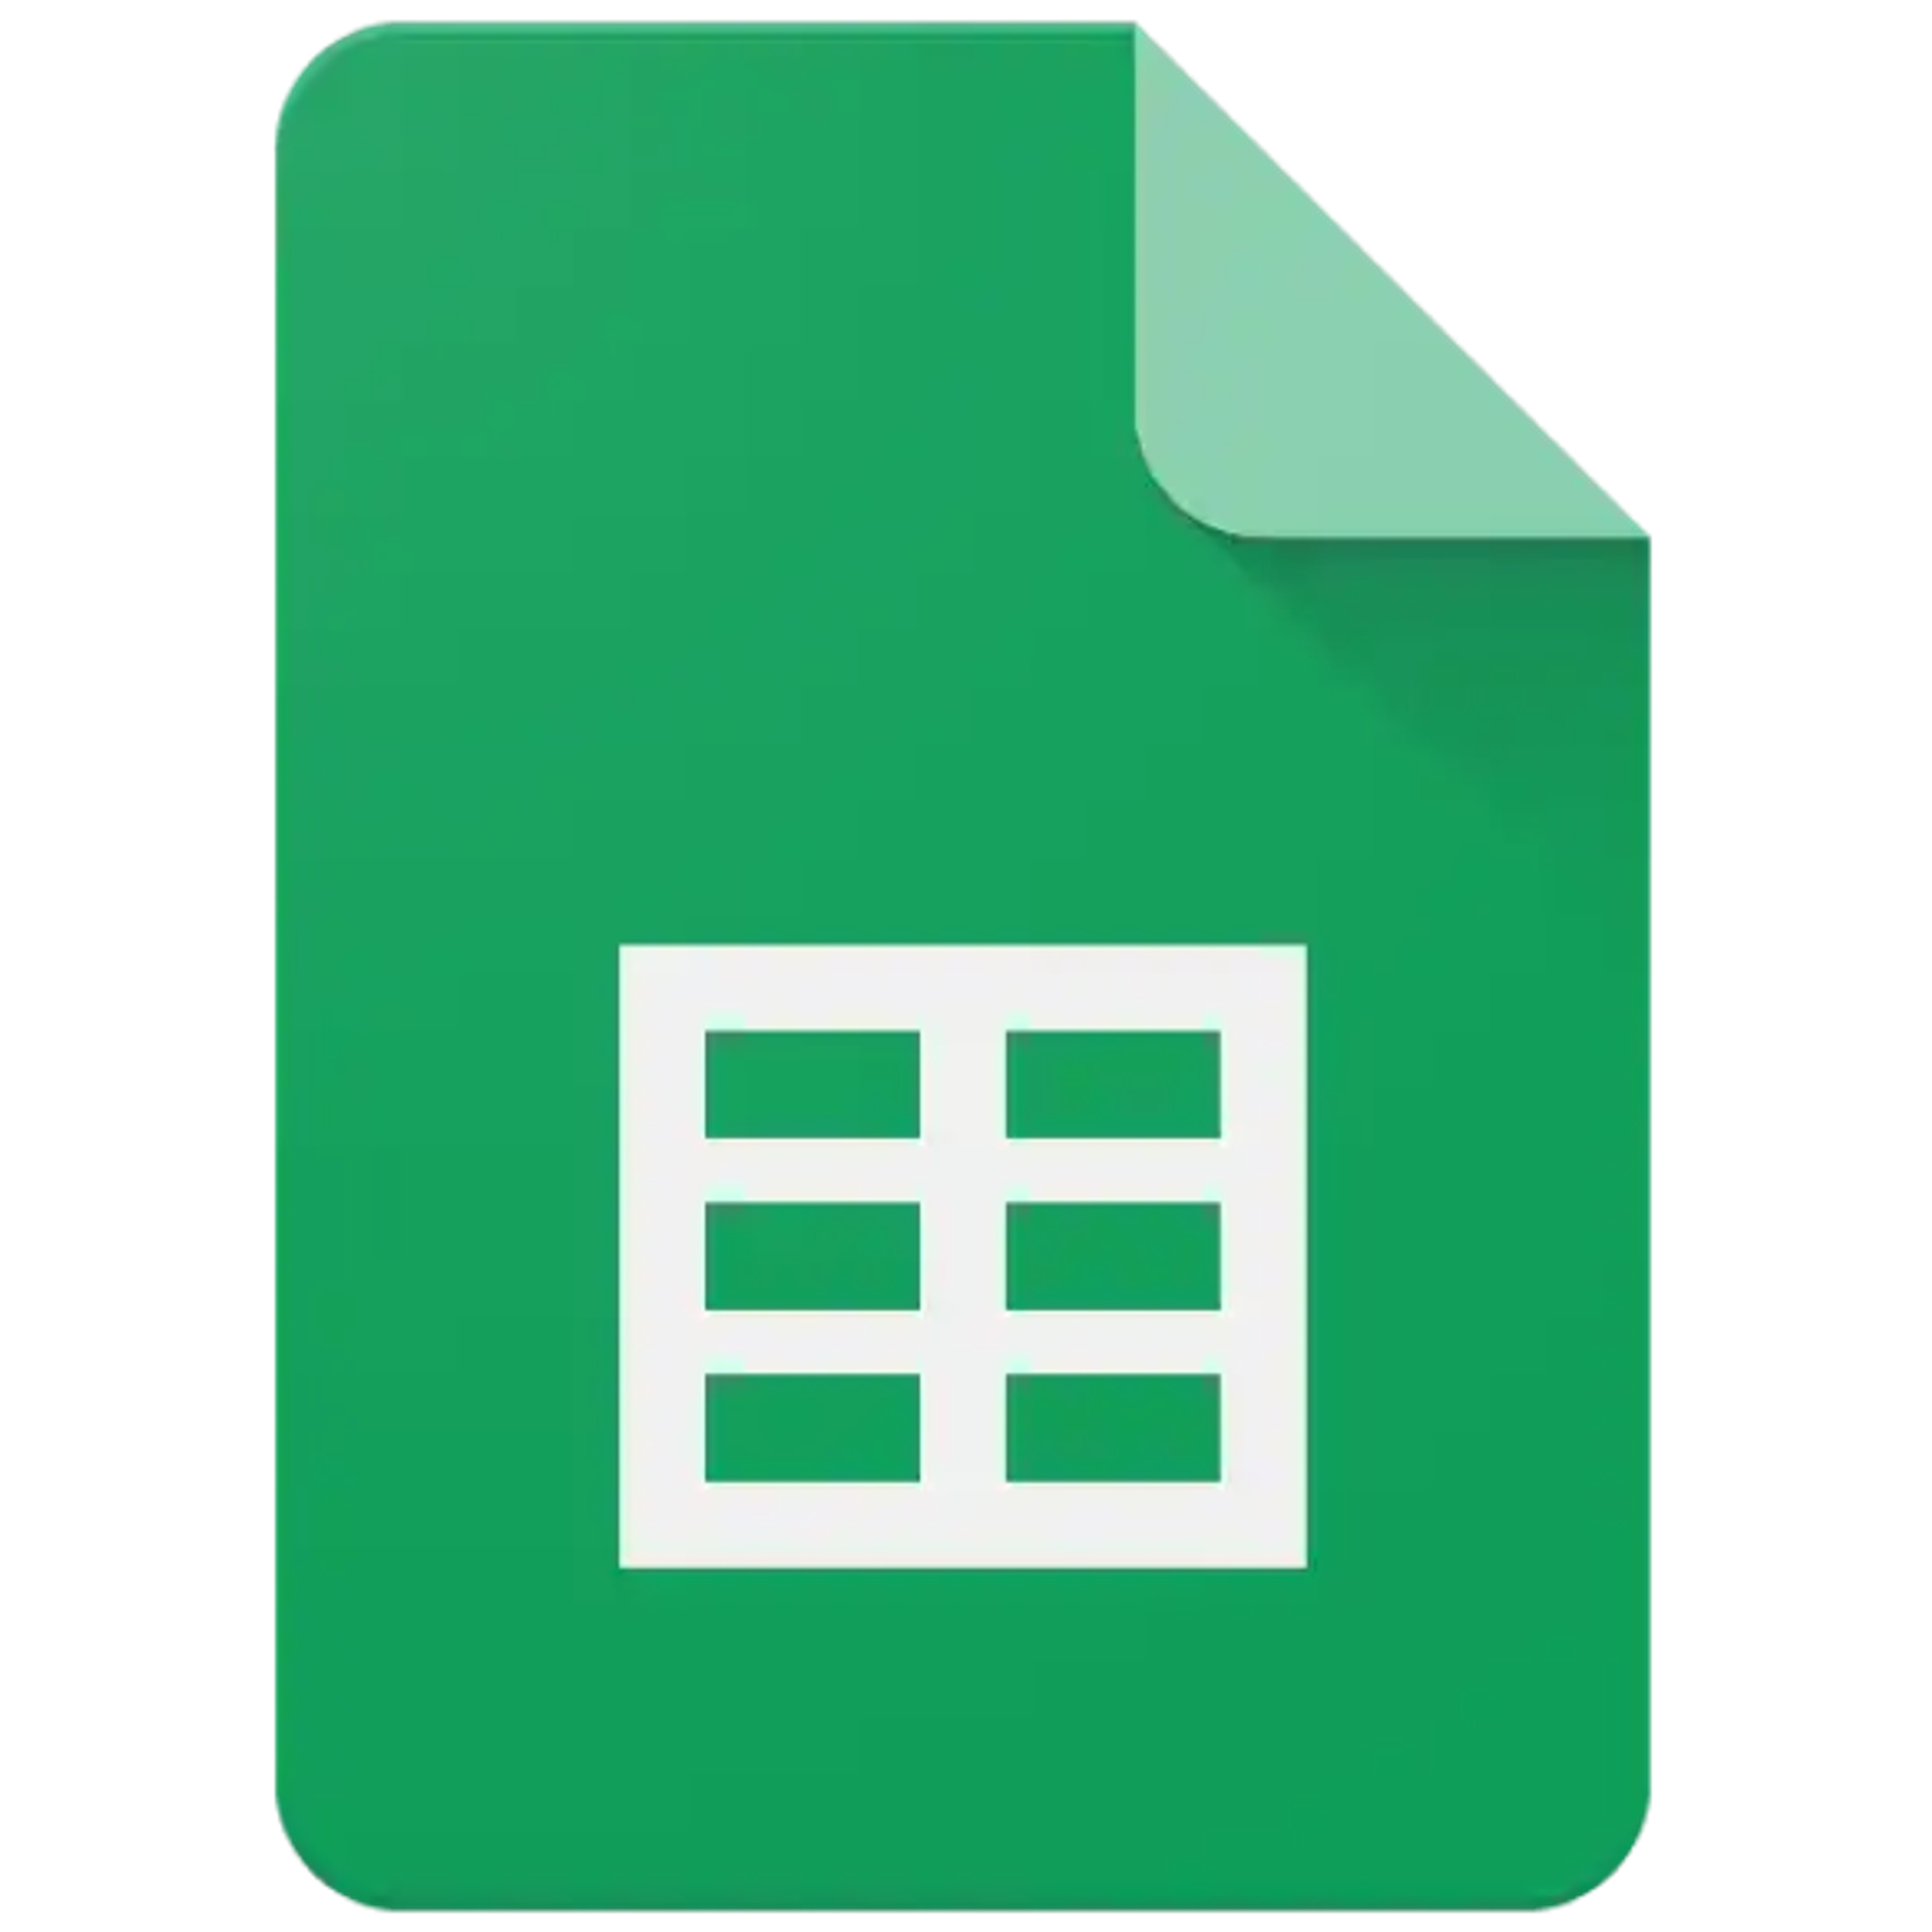 How to create a Google Sheets form